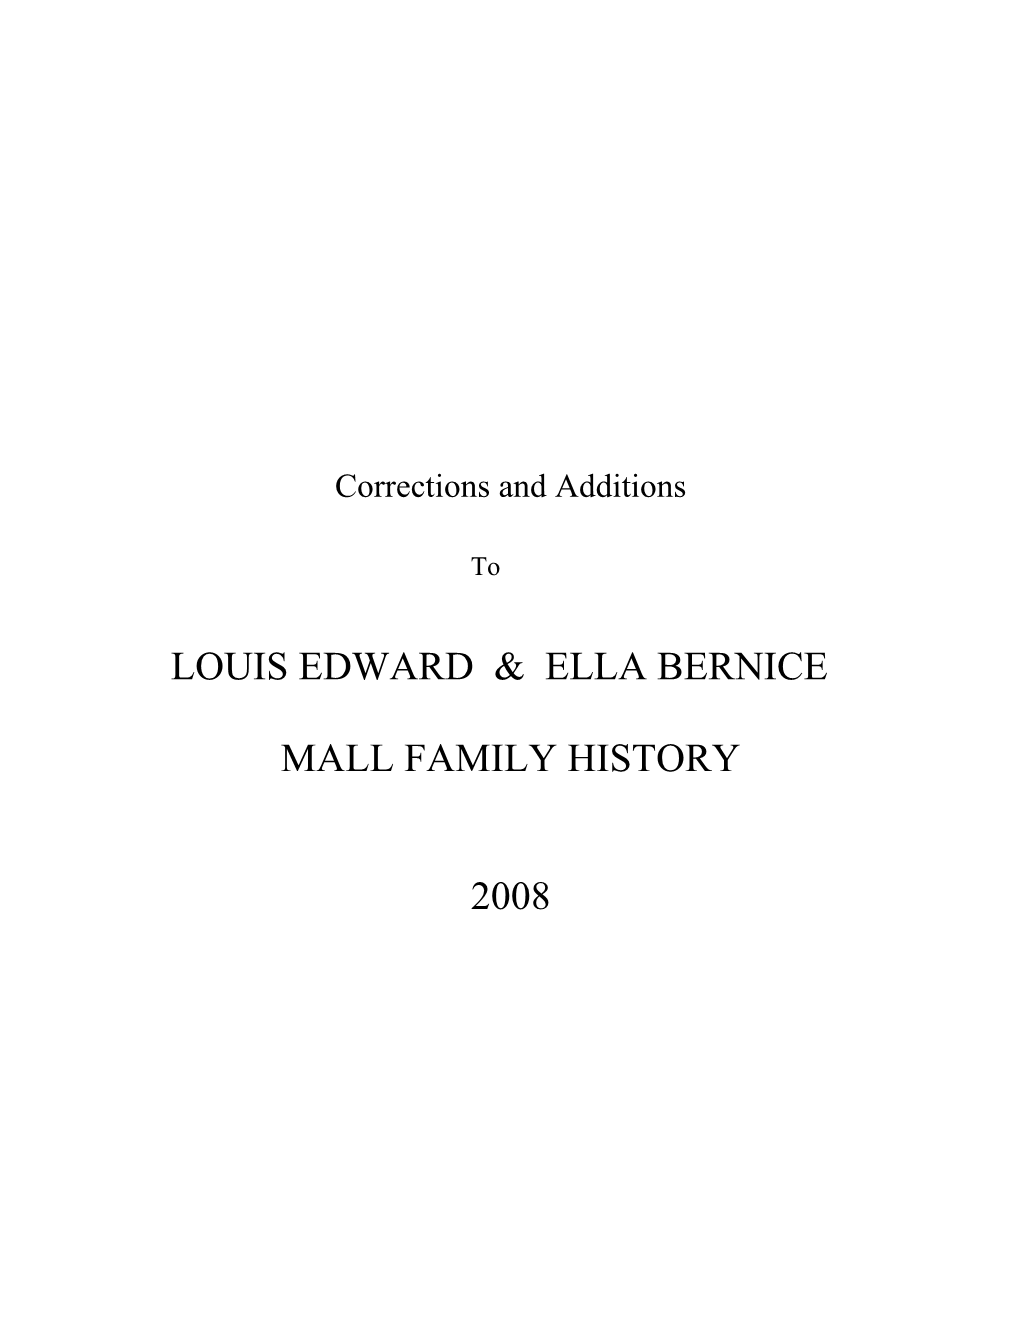 Corrections and Additions to Louis Edward and Ella Bernice Mall Family History